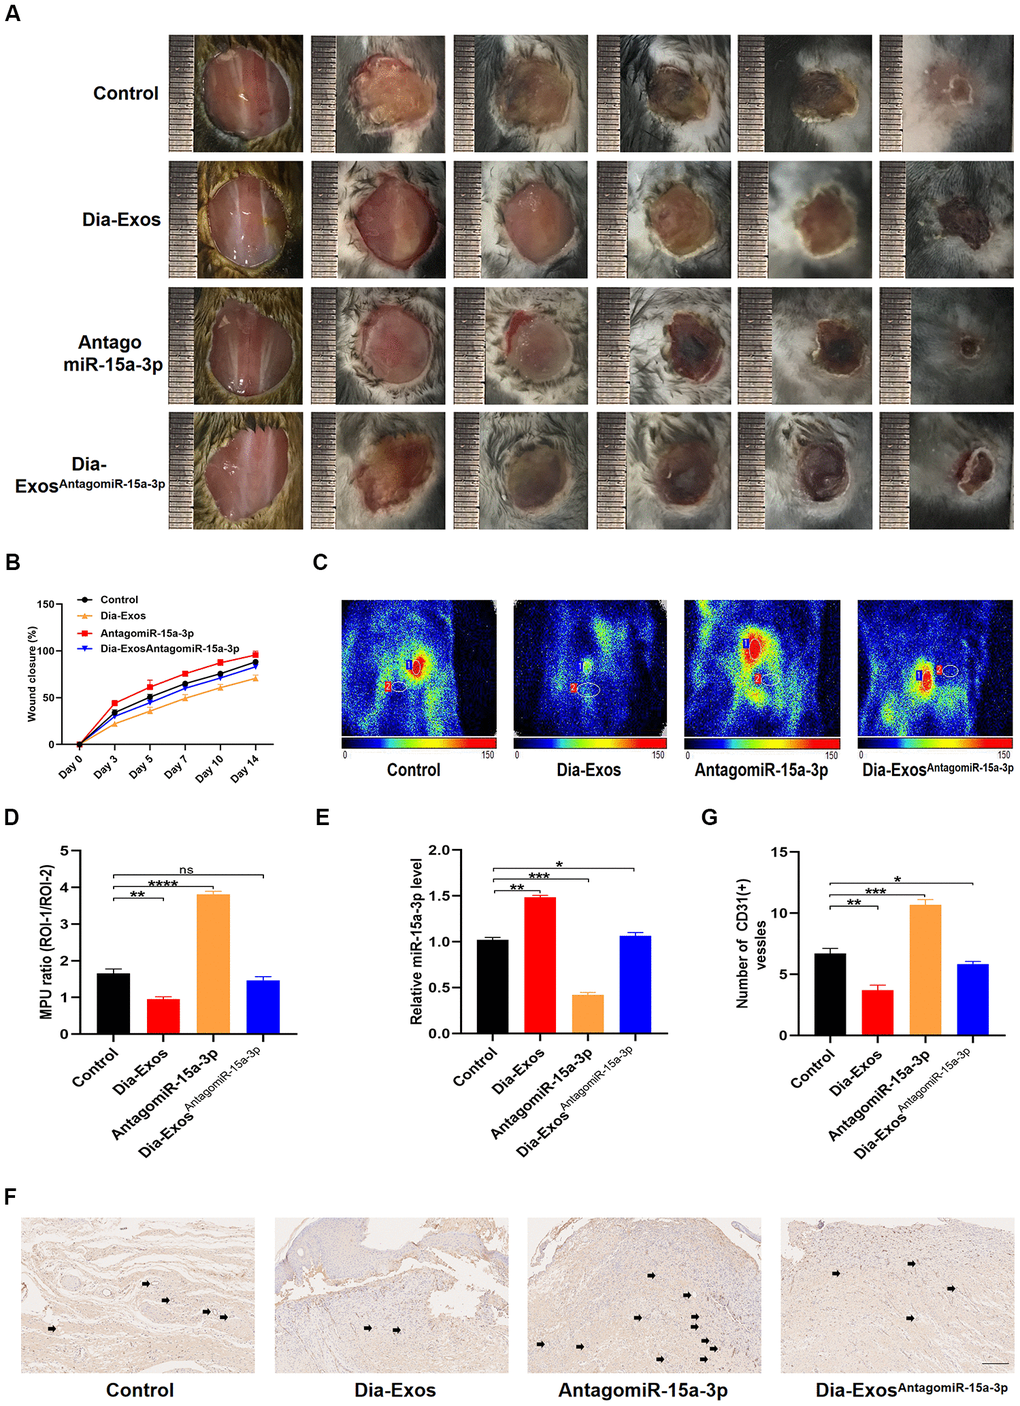 Knockdown of miR-15a-3p partially reversed the negative effects of Dia-Exos on wound healing in vivo. (A) General view of the wounds among in the four groups on days 0, 3, 5, 7, 10 and 14 post-wounding; n = 6 per group. (B) The mice of wound closure in the four groups were quantified using digital images evaluated with ImageJ software; n = 6 per group. (C, D) The blood flow at the wounds in the four groups was evaluated using small animal doppler detection; n = 6 per group. (E) The expression of miR-15a-3p in the wound tissues of the four groups. (F, G) CD31 immunohistochemistry results of the four groups. The number of CD31-positive cells was quantified in five random fields of view. Vessels with diameters of 2-10 μm were counted as individual vessels. n = 6 per group; scale bar: 100 μm. Data are the means ± SDs of three independent experiments. *p 